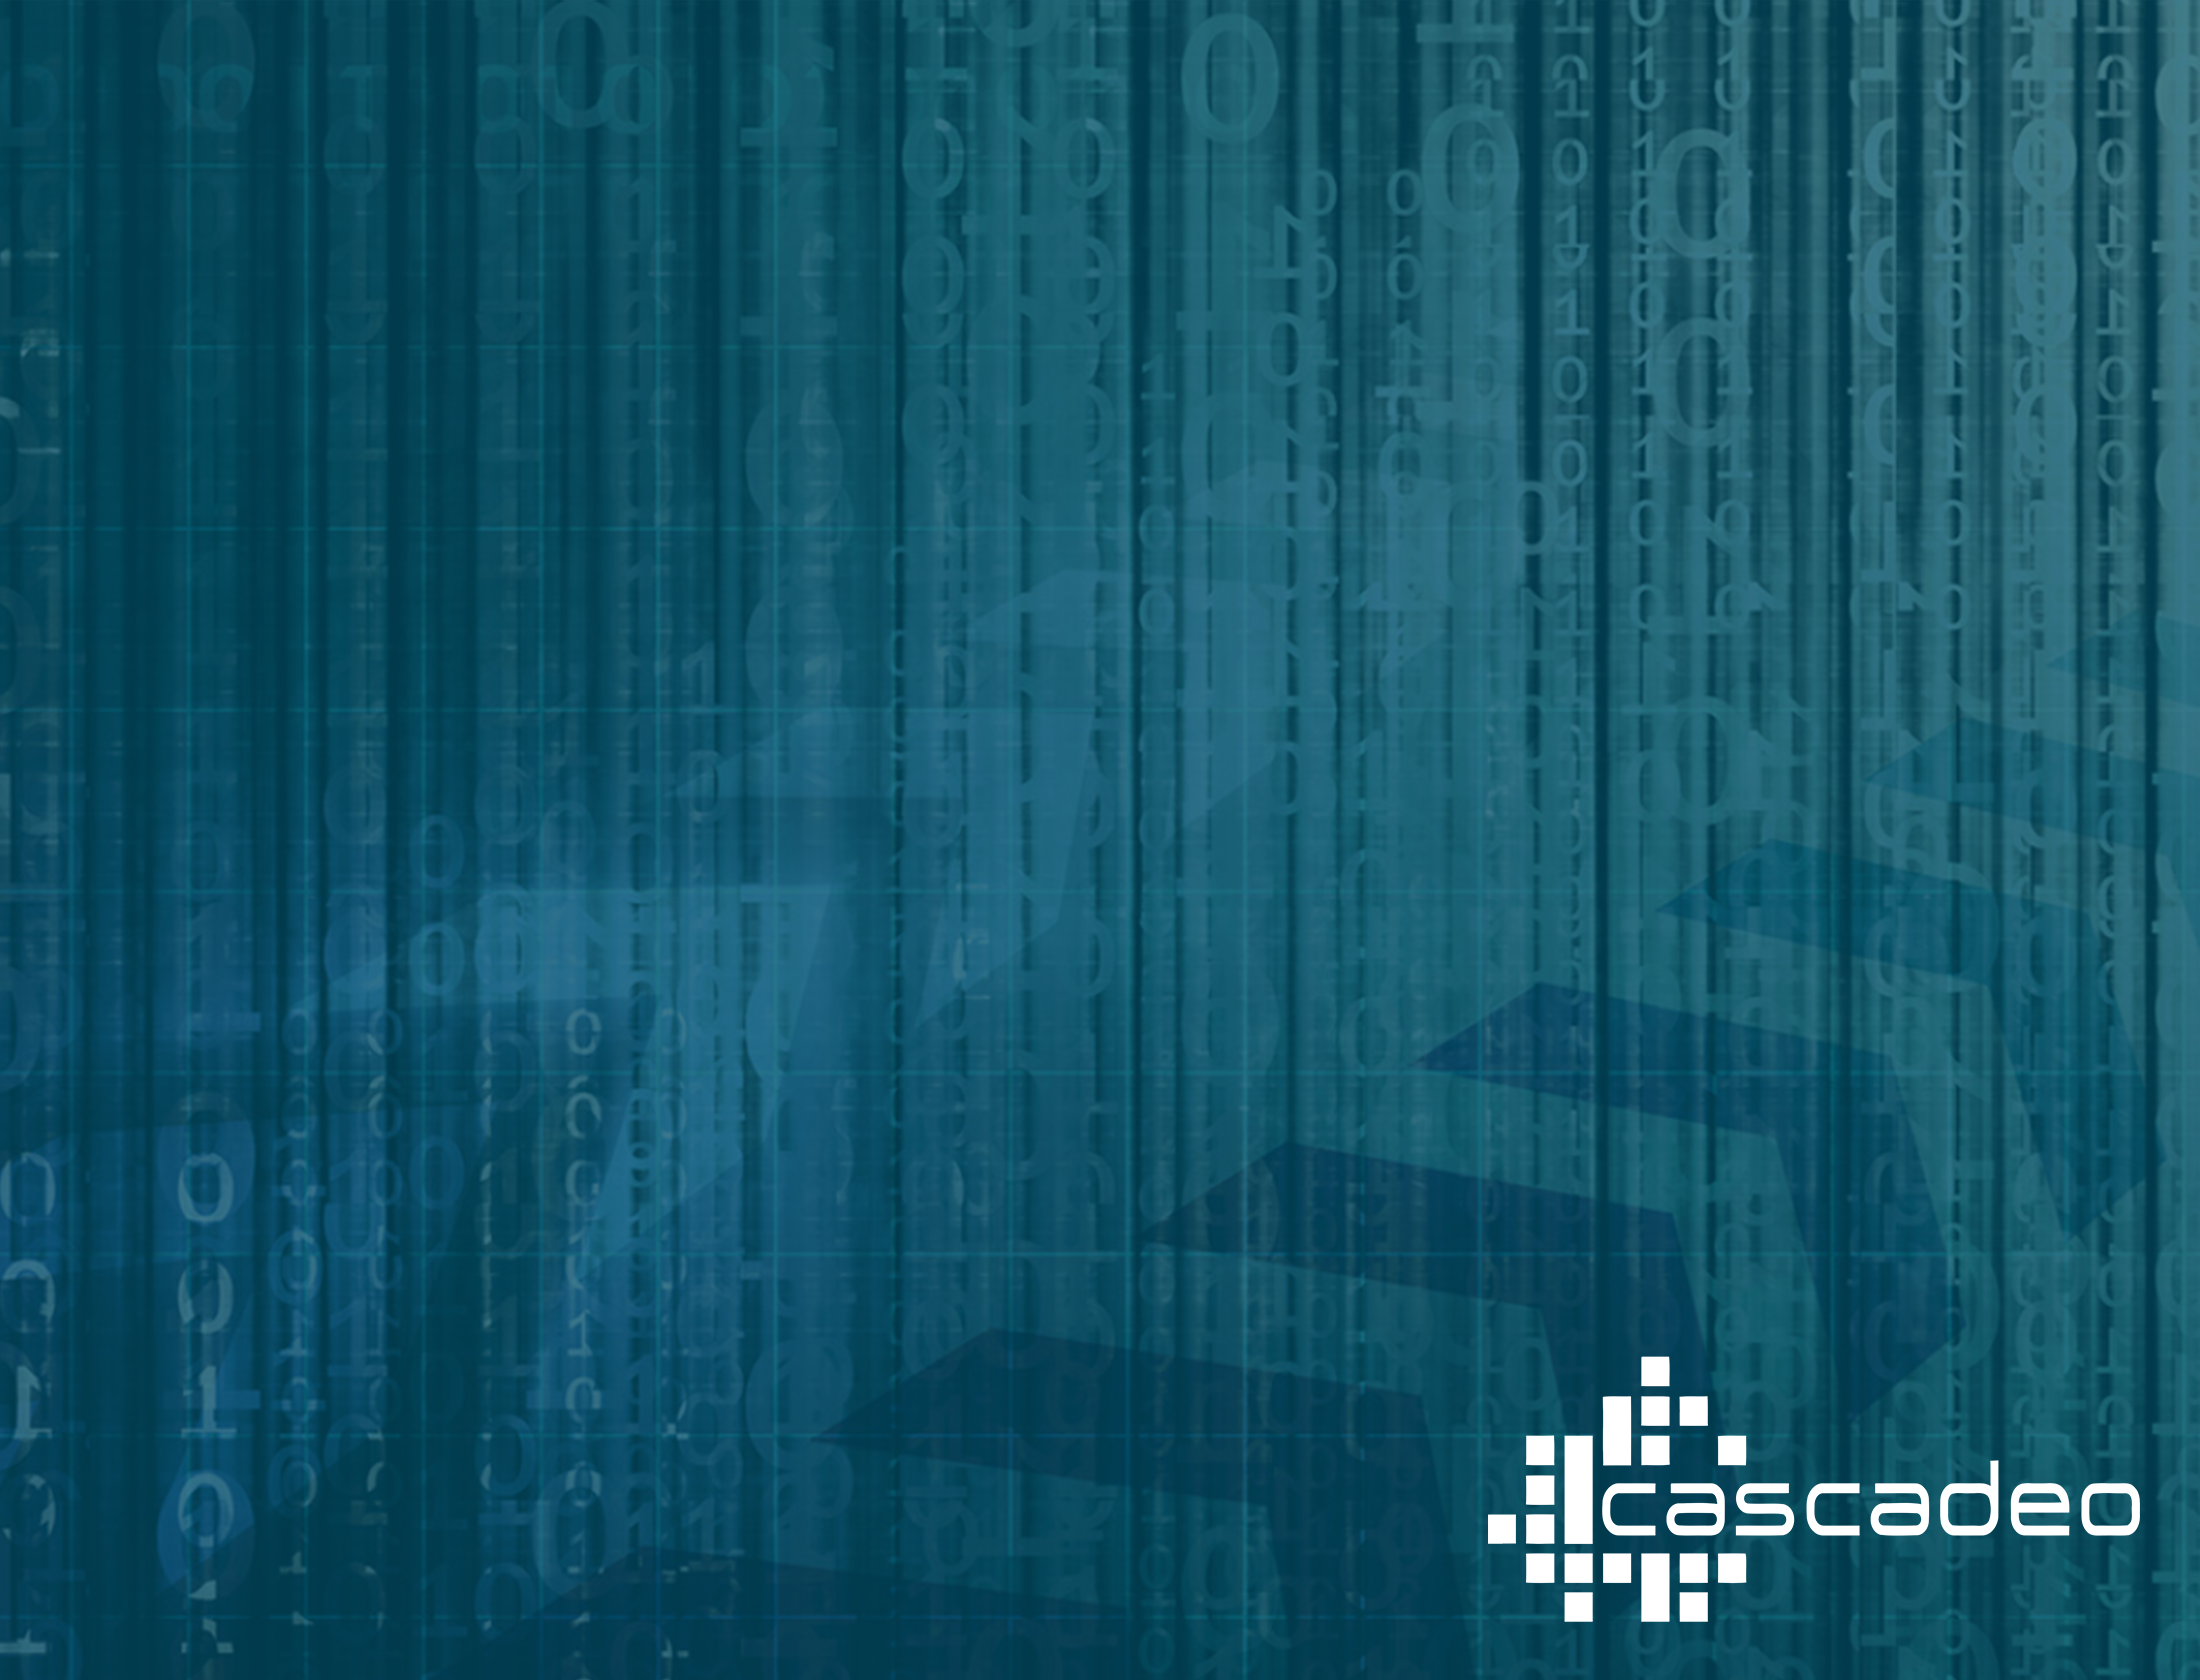 Decorative image of strands of code with arrows pointing upward and to the right in the background and the Cascadeo logo in the lower right.